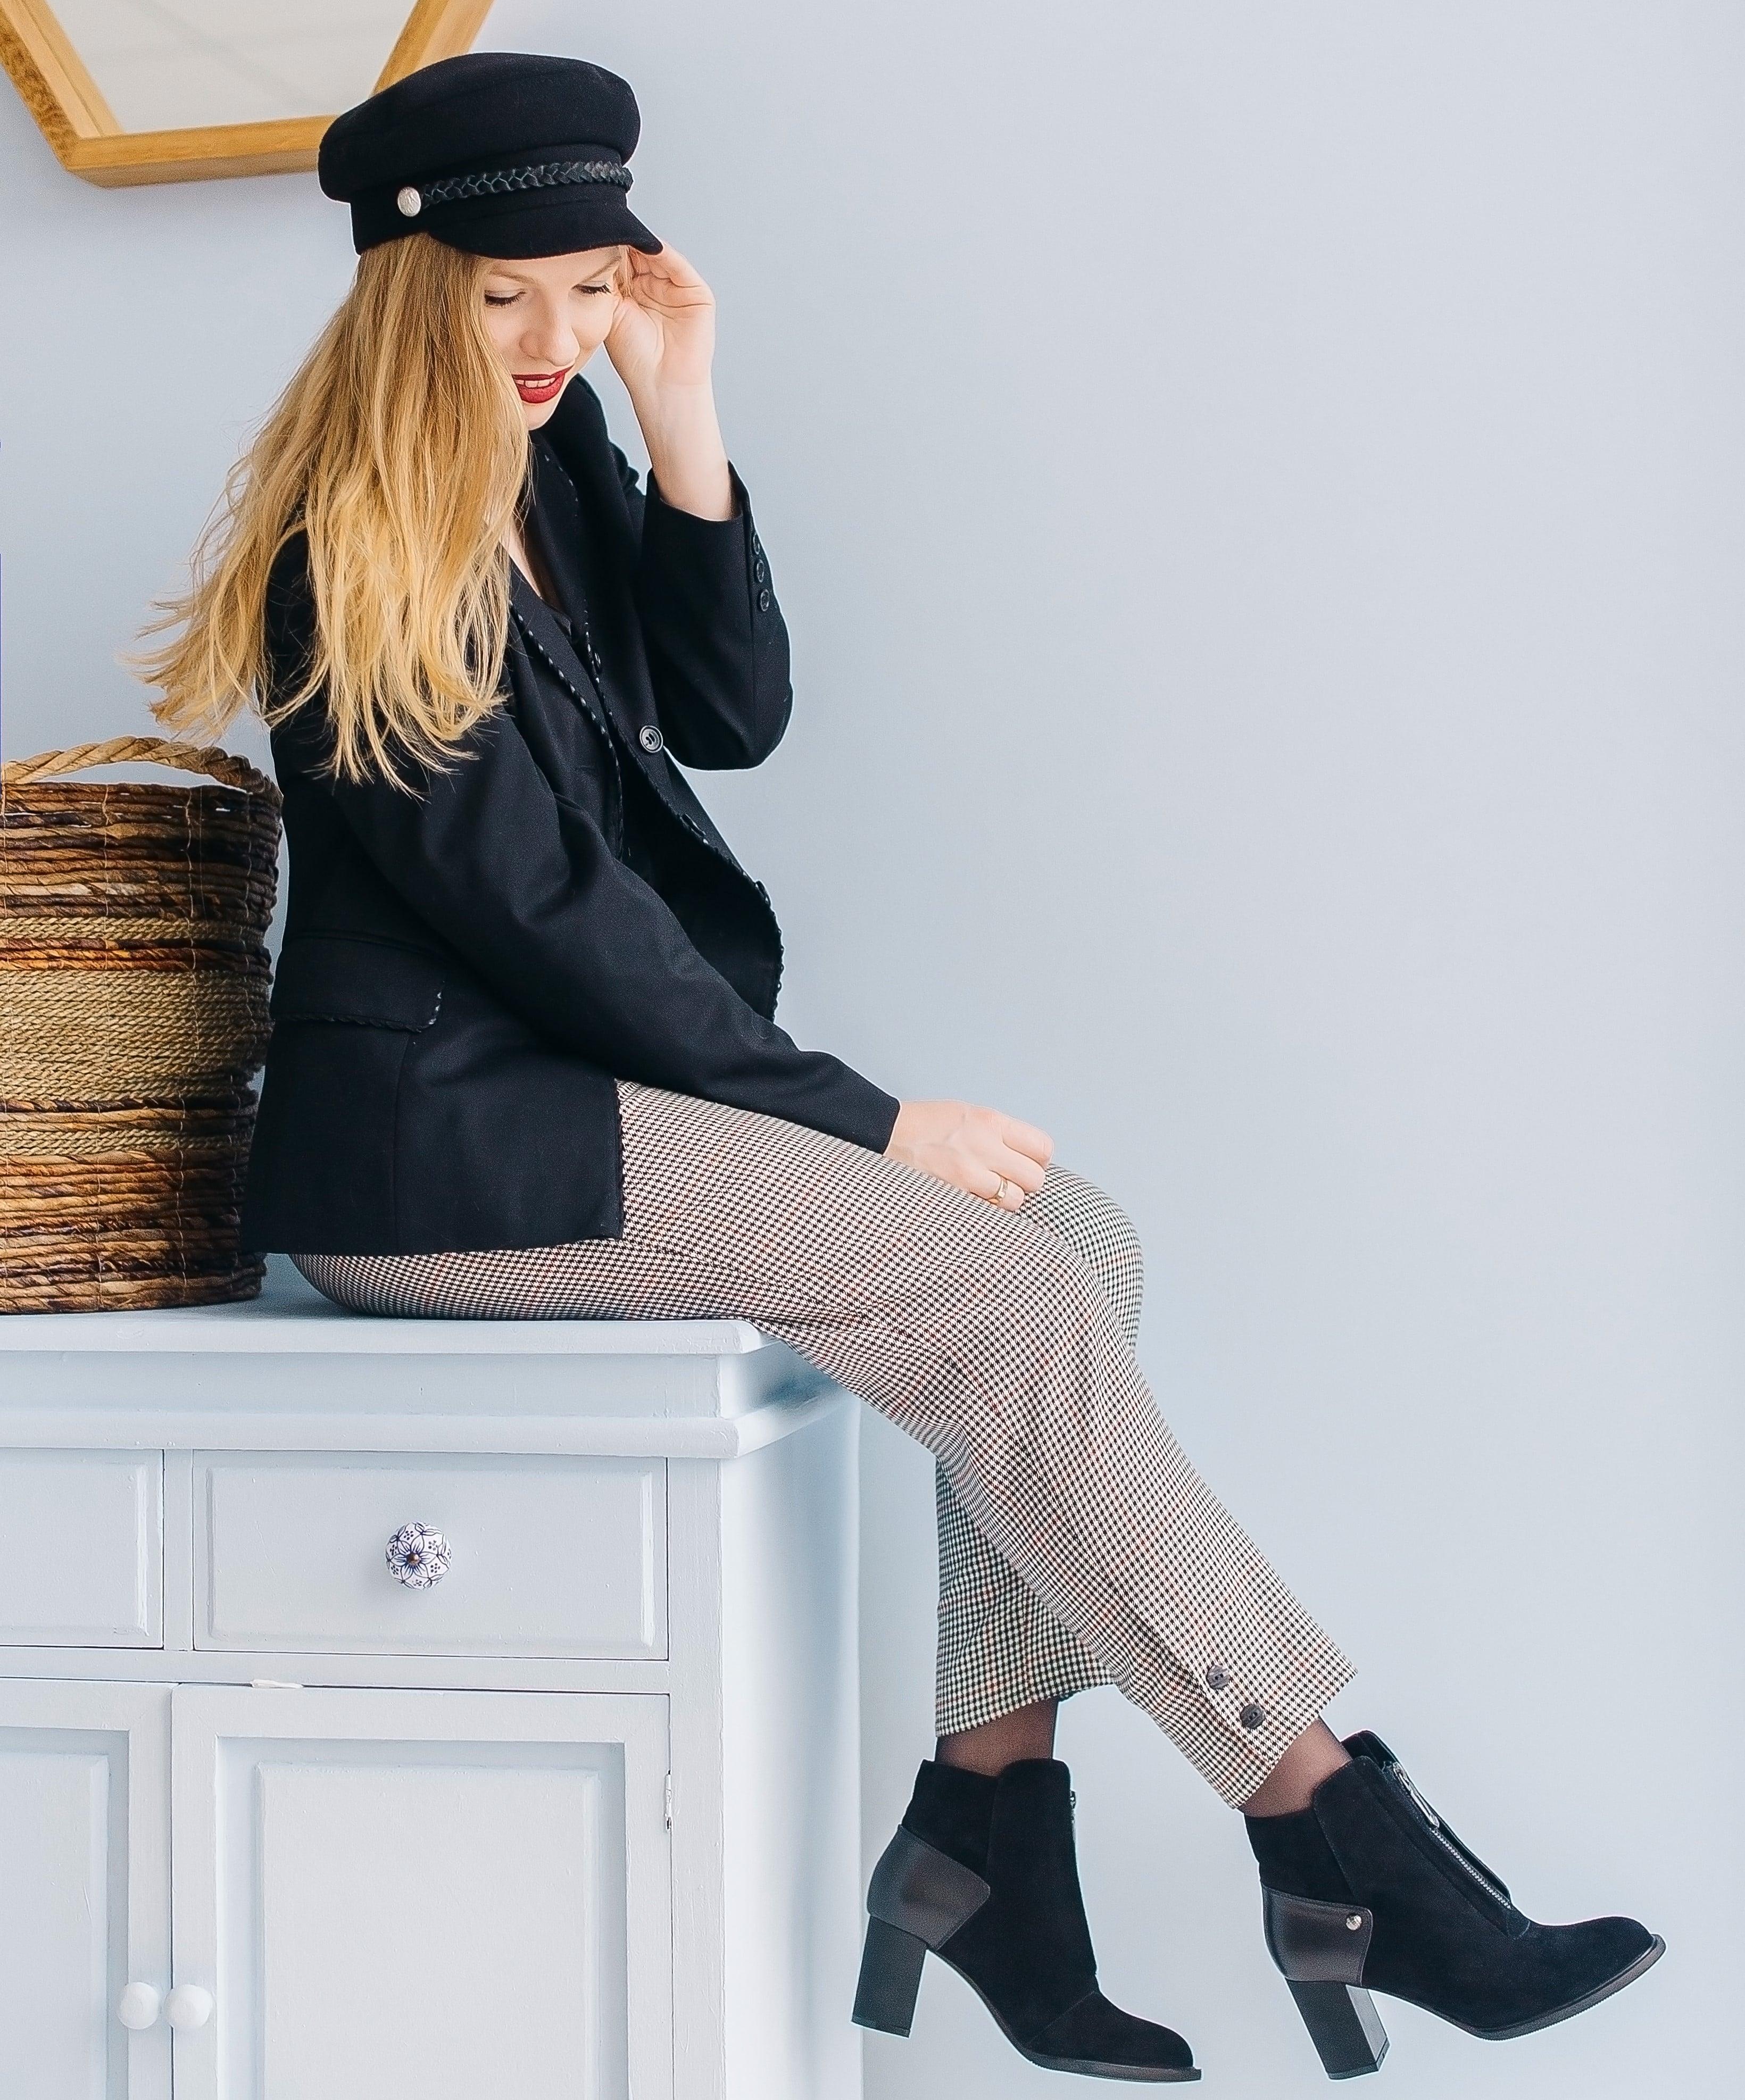 Wear Ankle Booties with Dress Pants